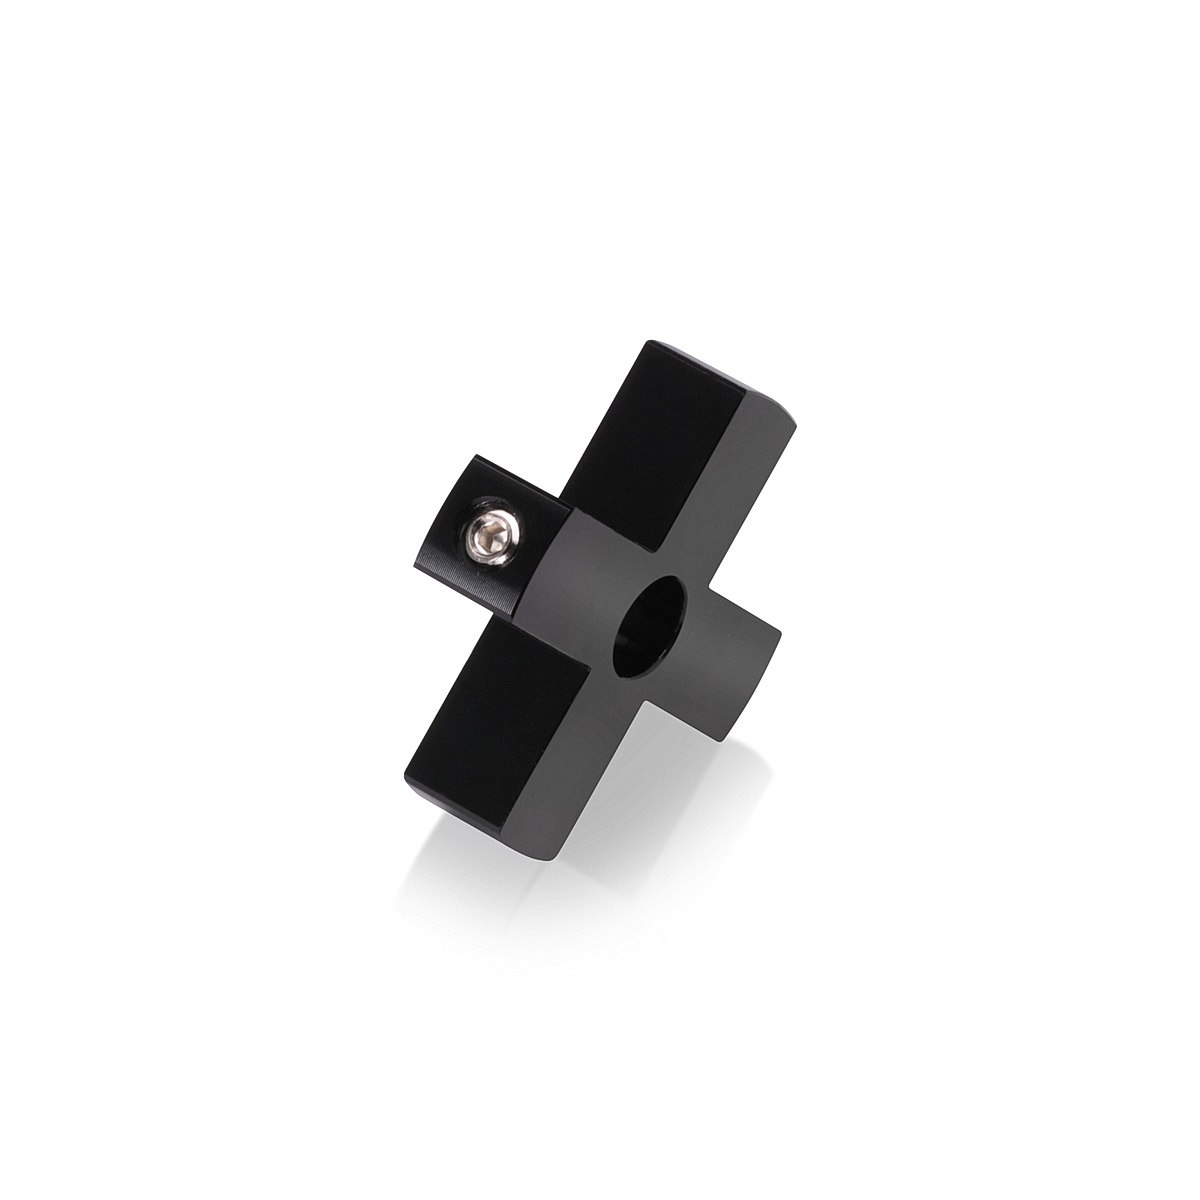 4-Way Standoffs Hub, Diameter: 1 1/2'', Thickness: 3/8'', Black Anodized Aluminum [Required Material Hole Size: 7/16'']